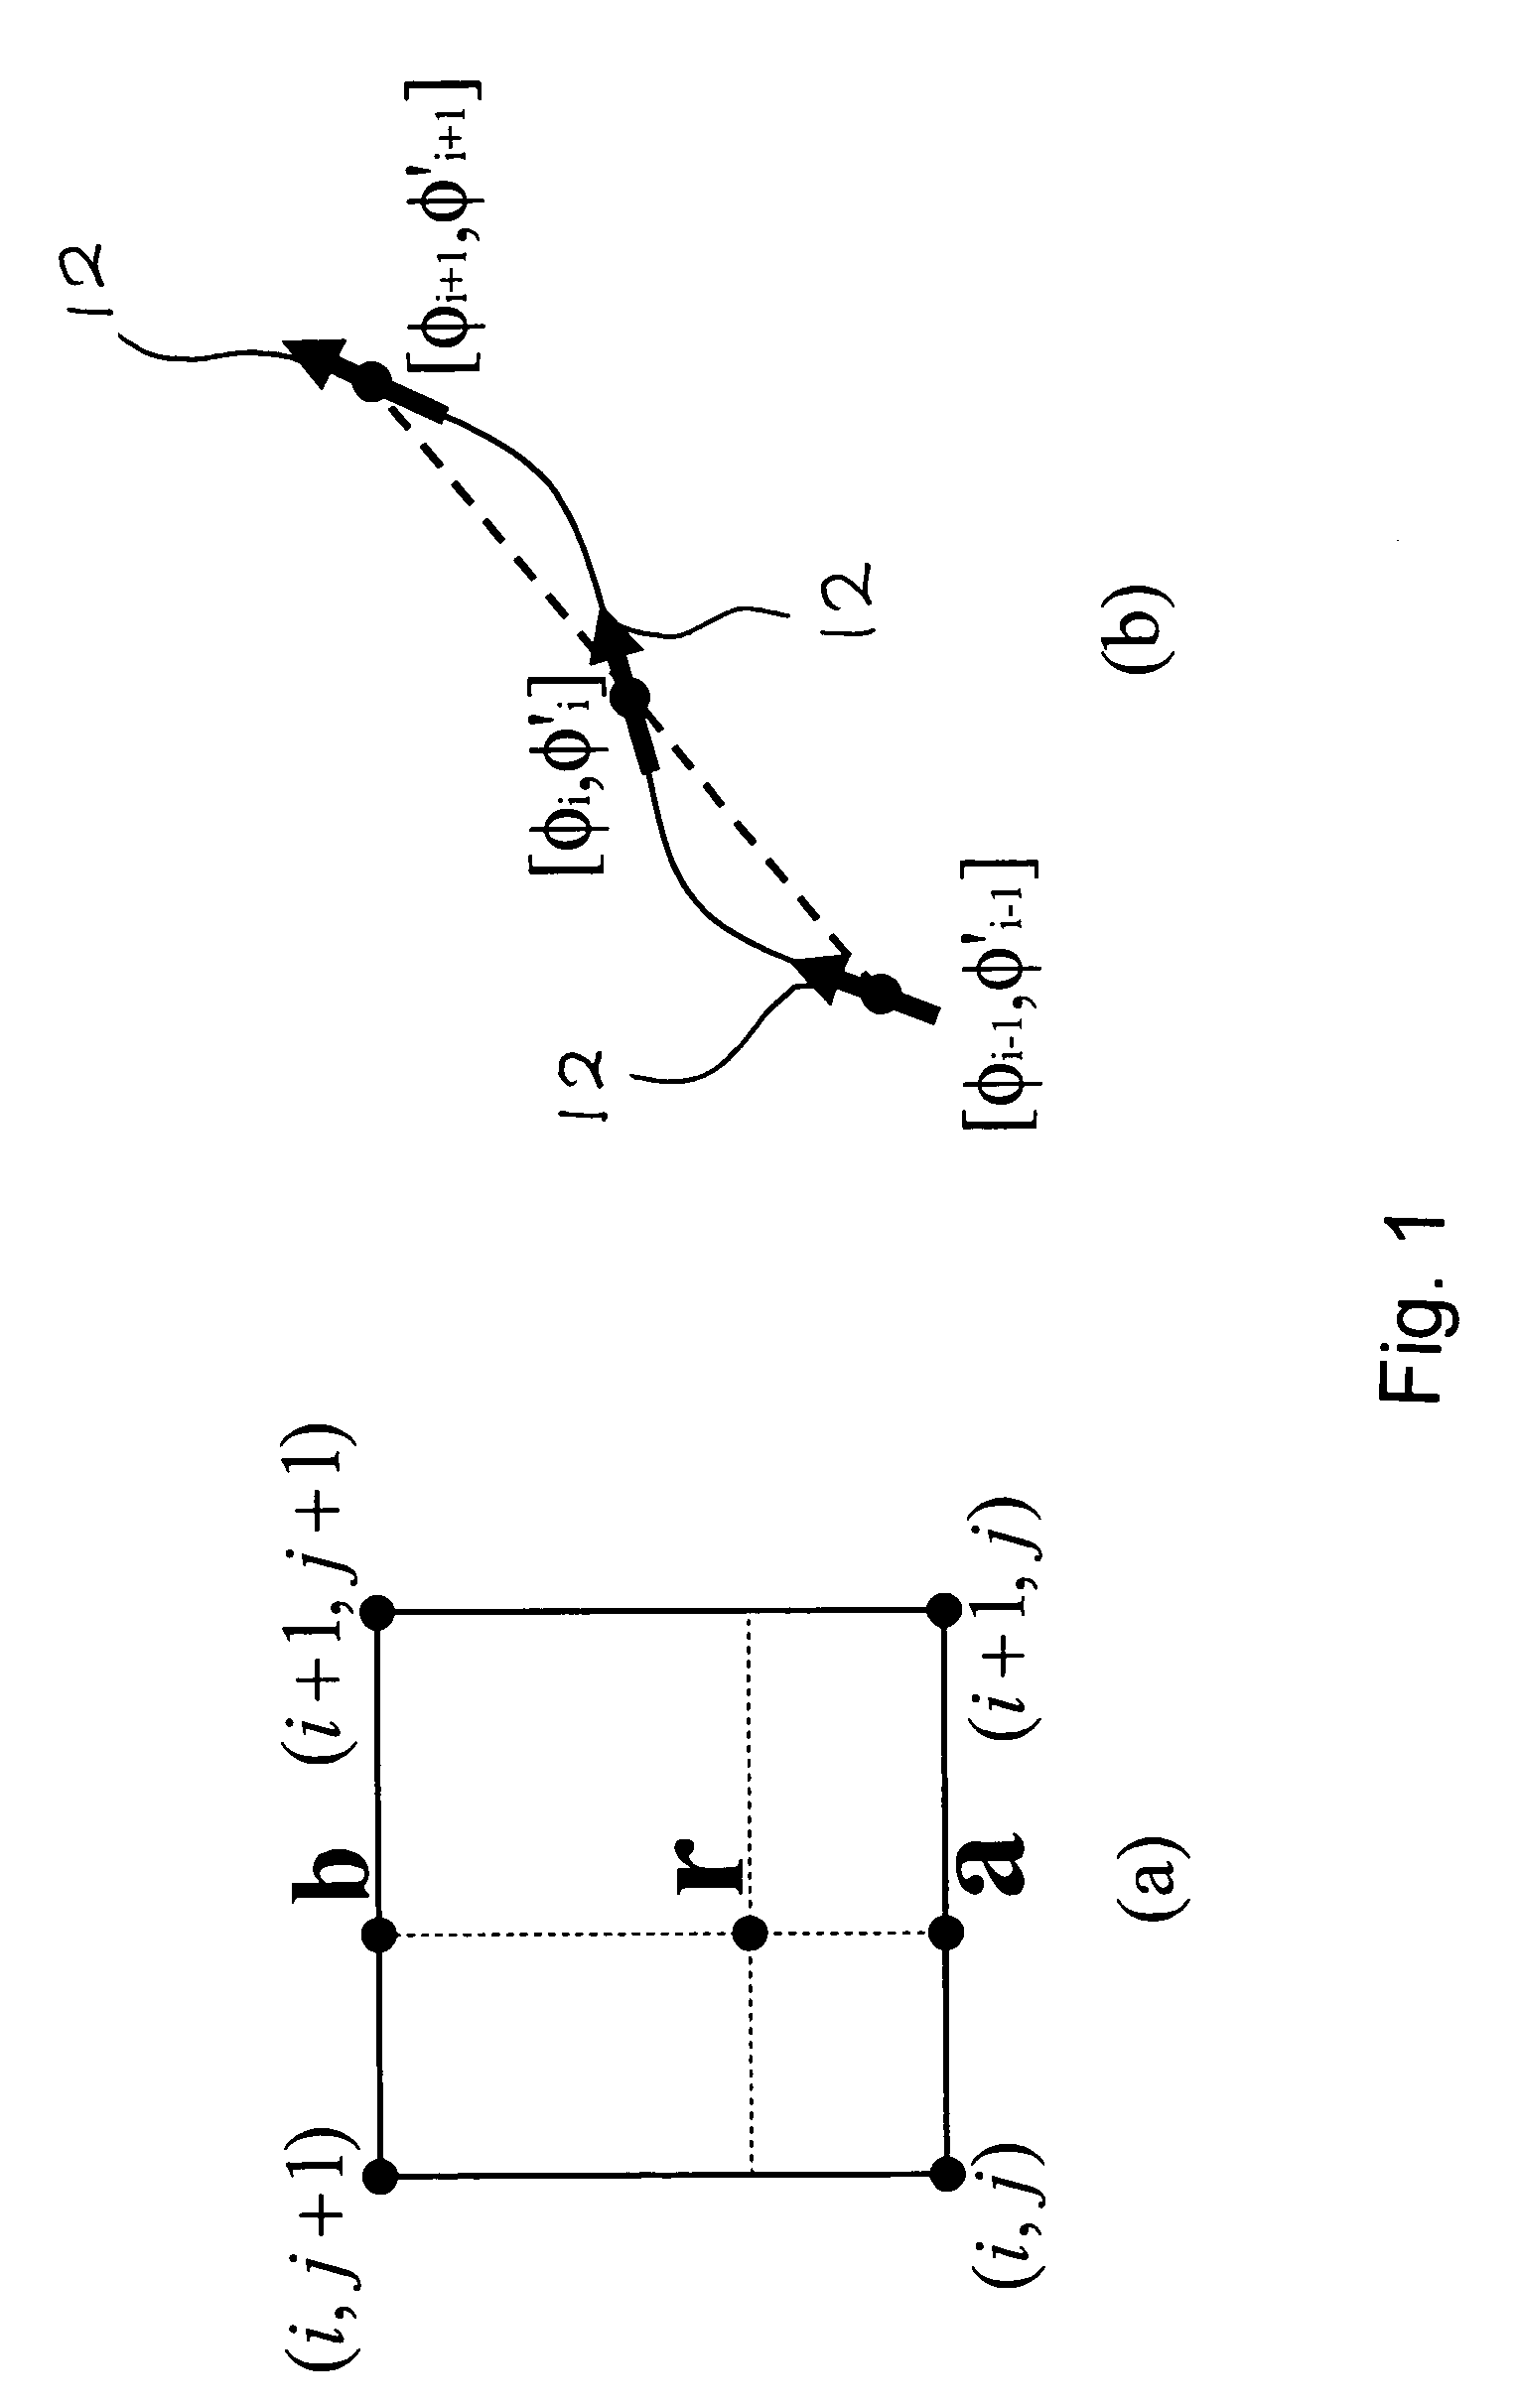 Method for simulating stable but non-dissipative water